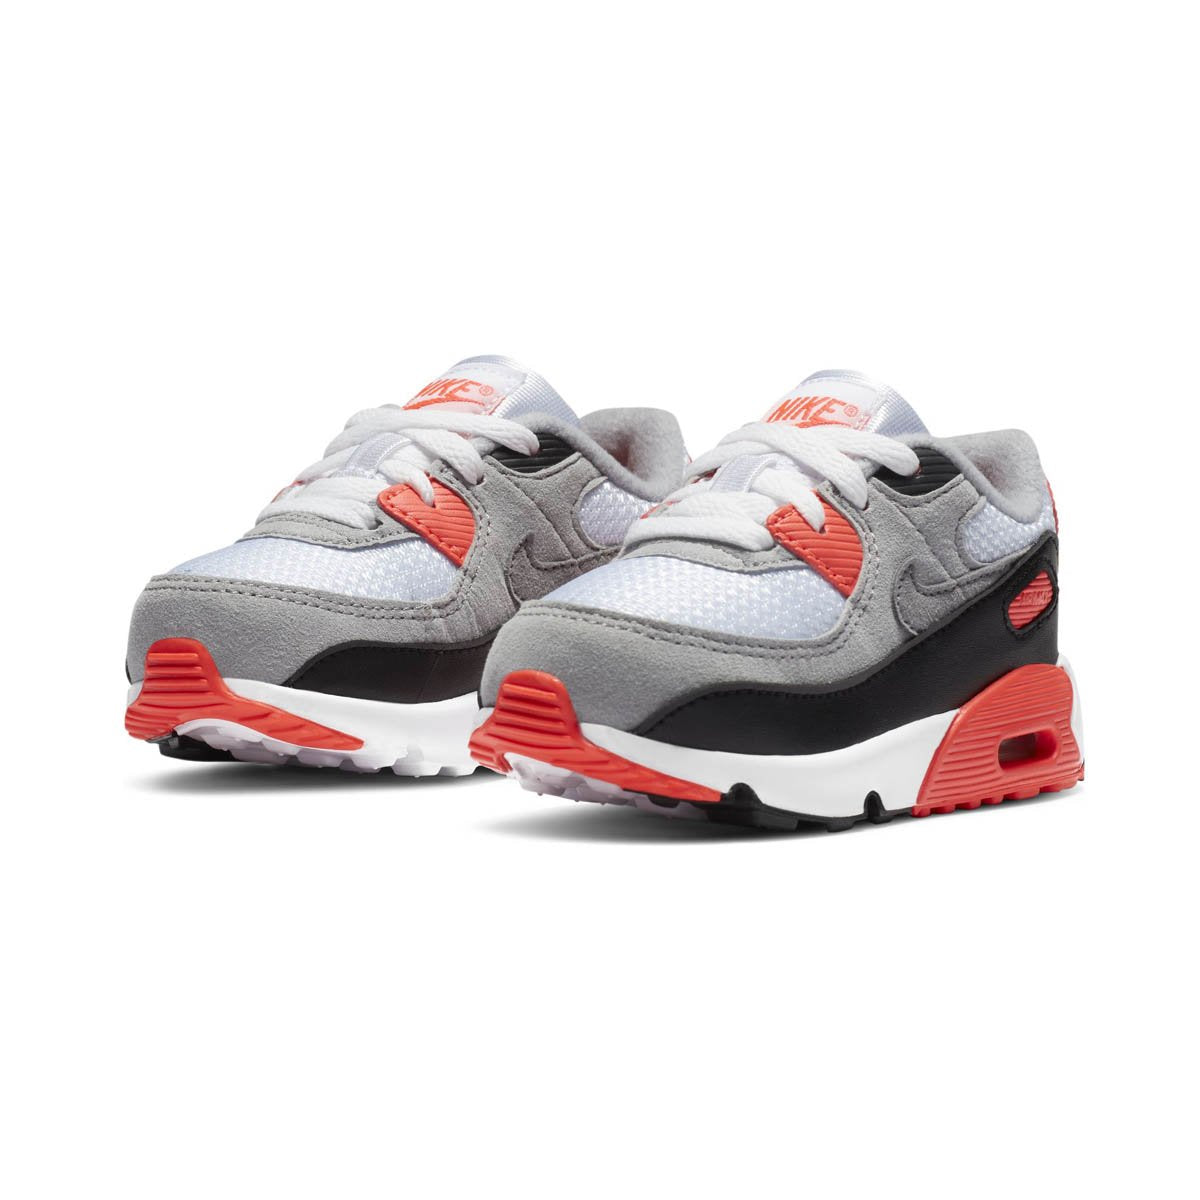 Nike Max 90 QS Baby/Toddler Shoe - Shoes